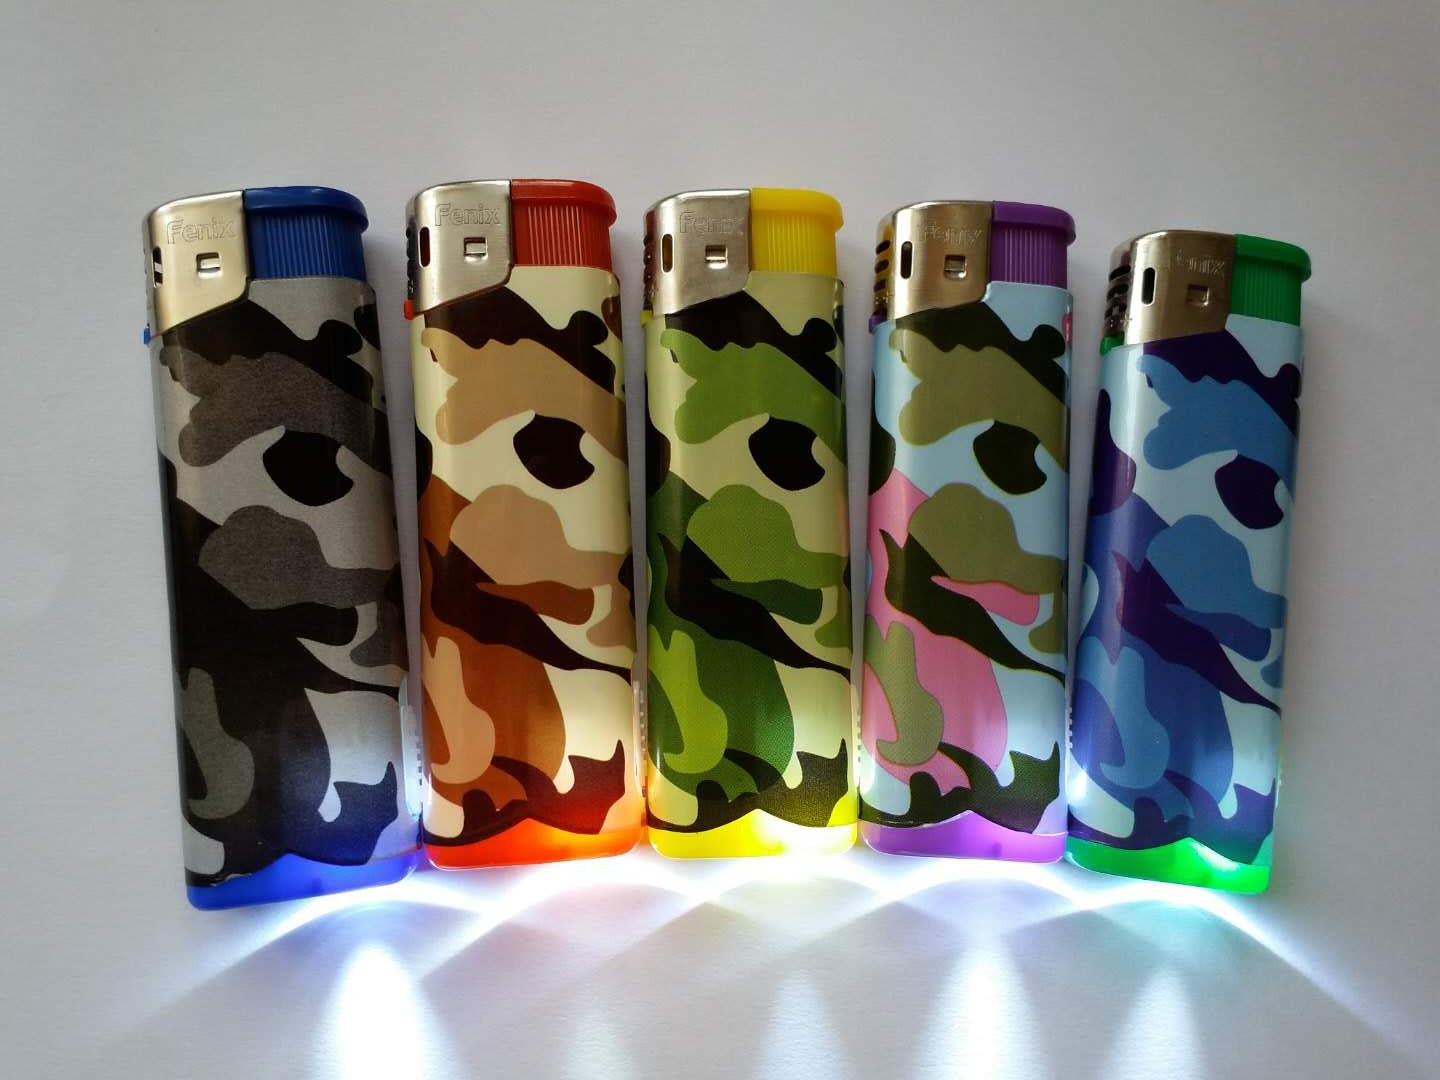 gas lighter with LED lamp